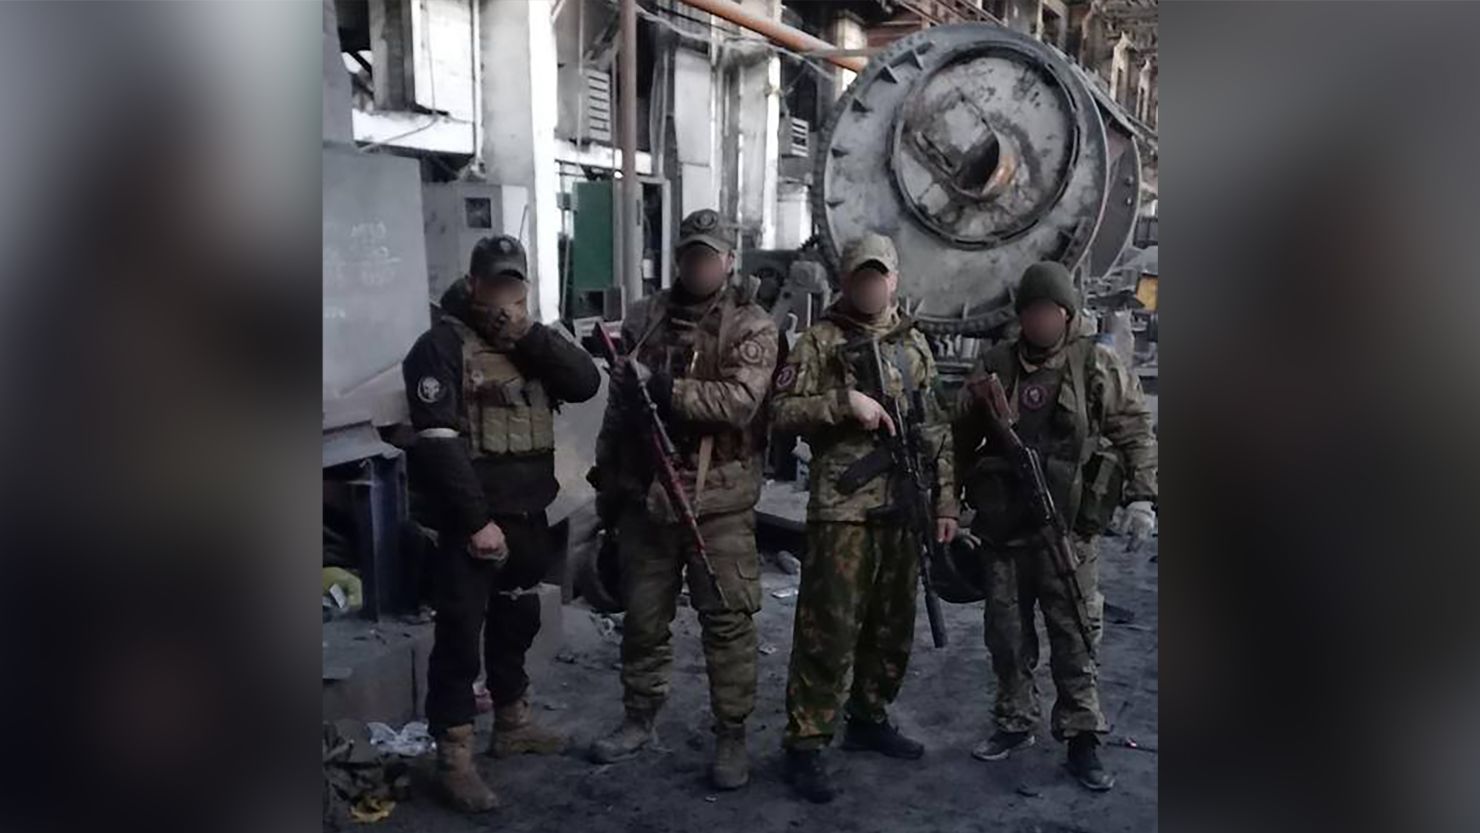 Fighters from the Wagner private military company pose for photographs in what appears to be a workshop within the AZOM metallurgical plant in Bakhmut, Ukraine in this file image. 